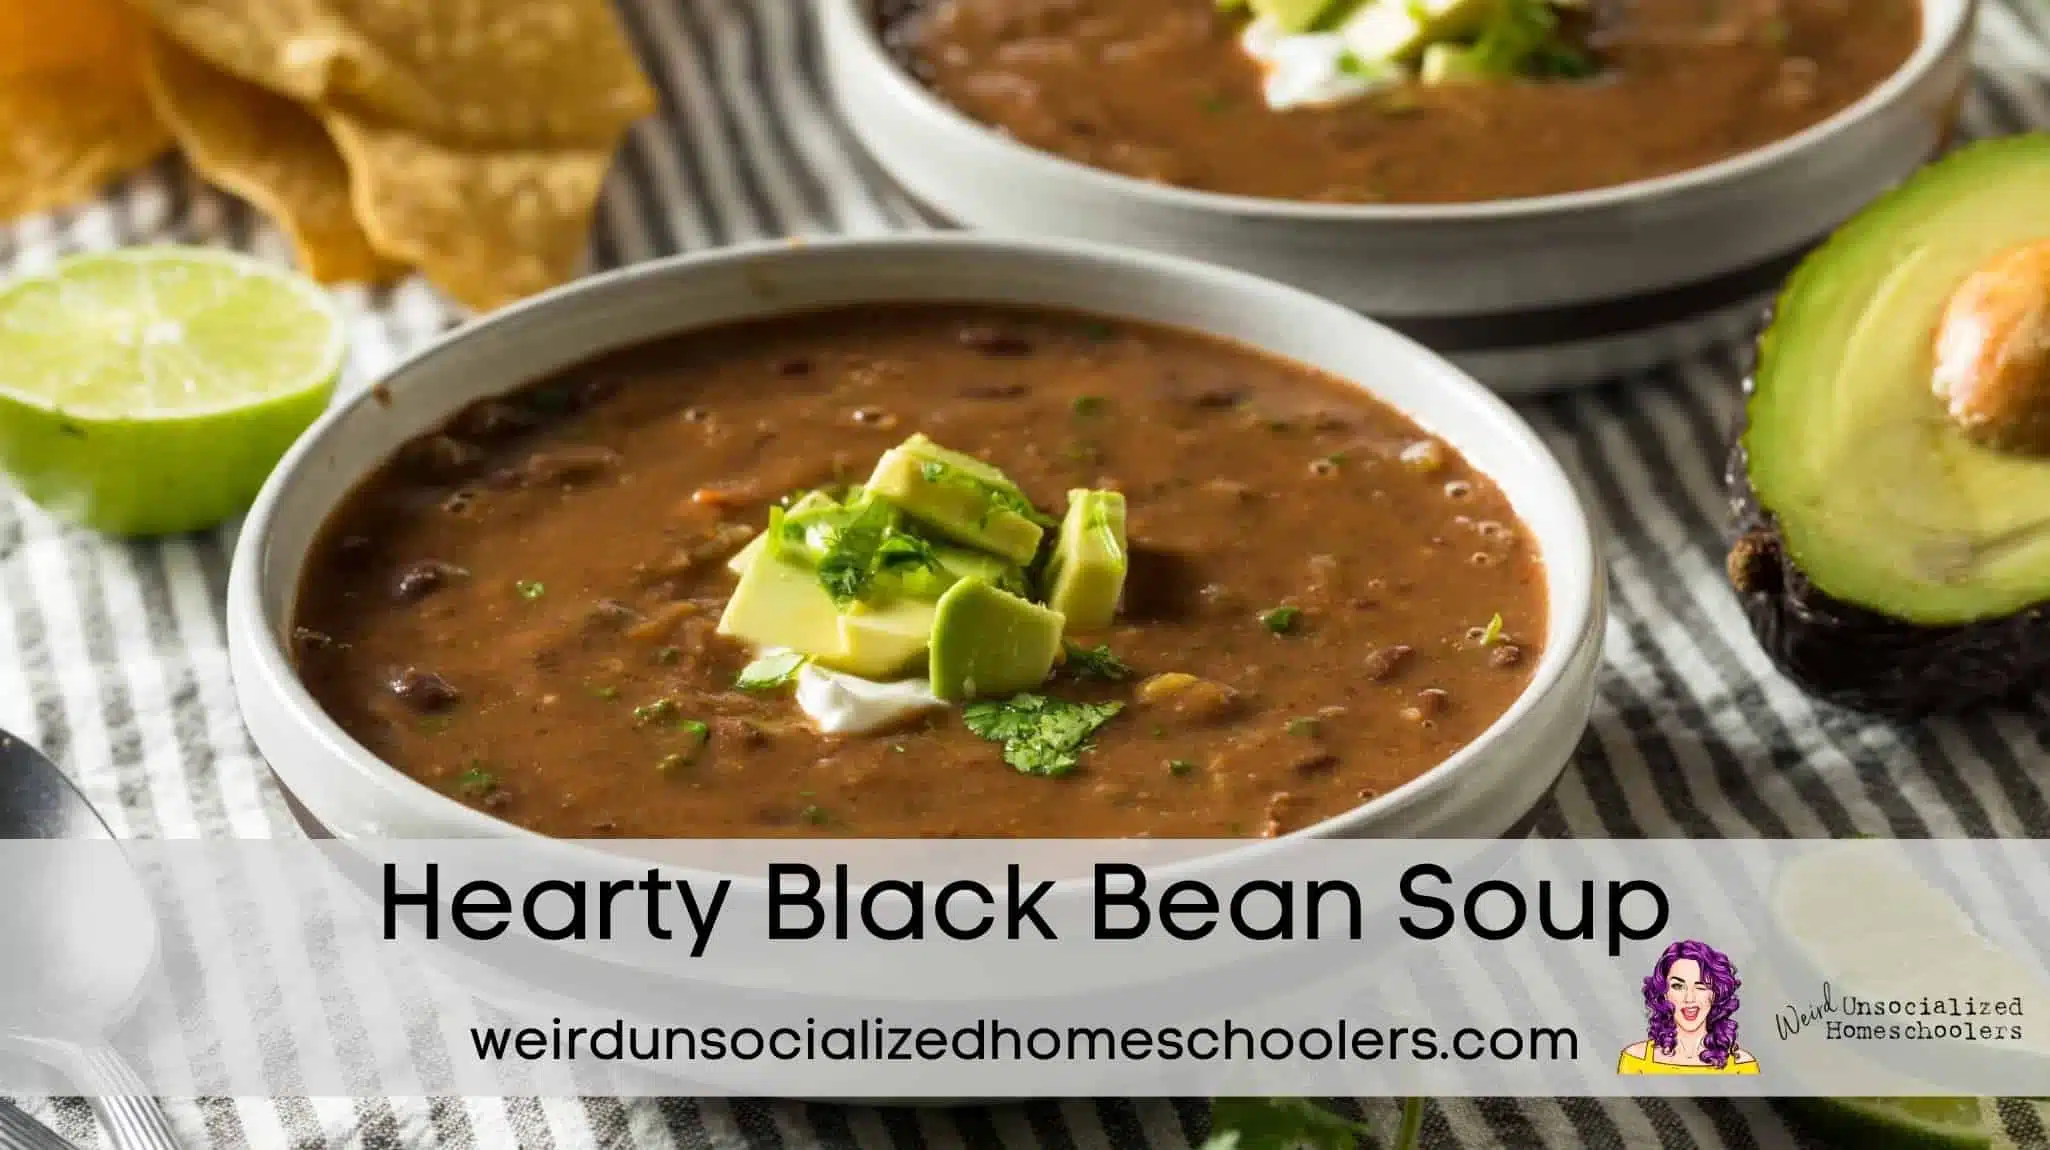 Easy and Delicious Black Bean Soup Recipe